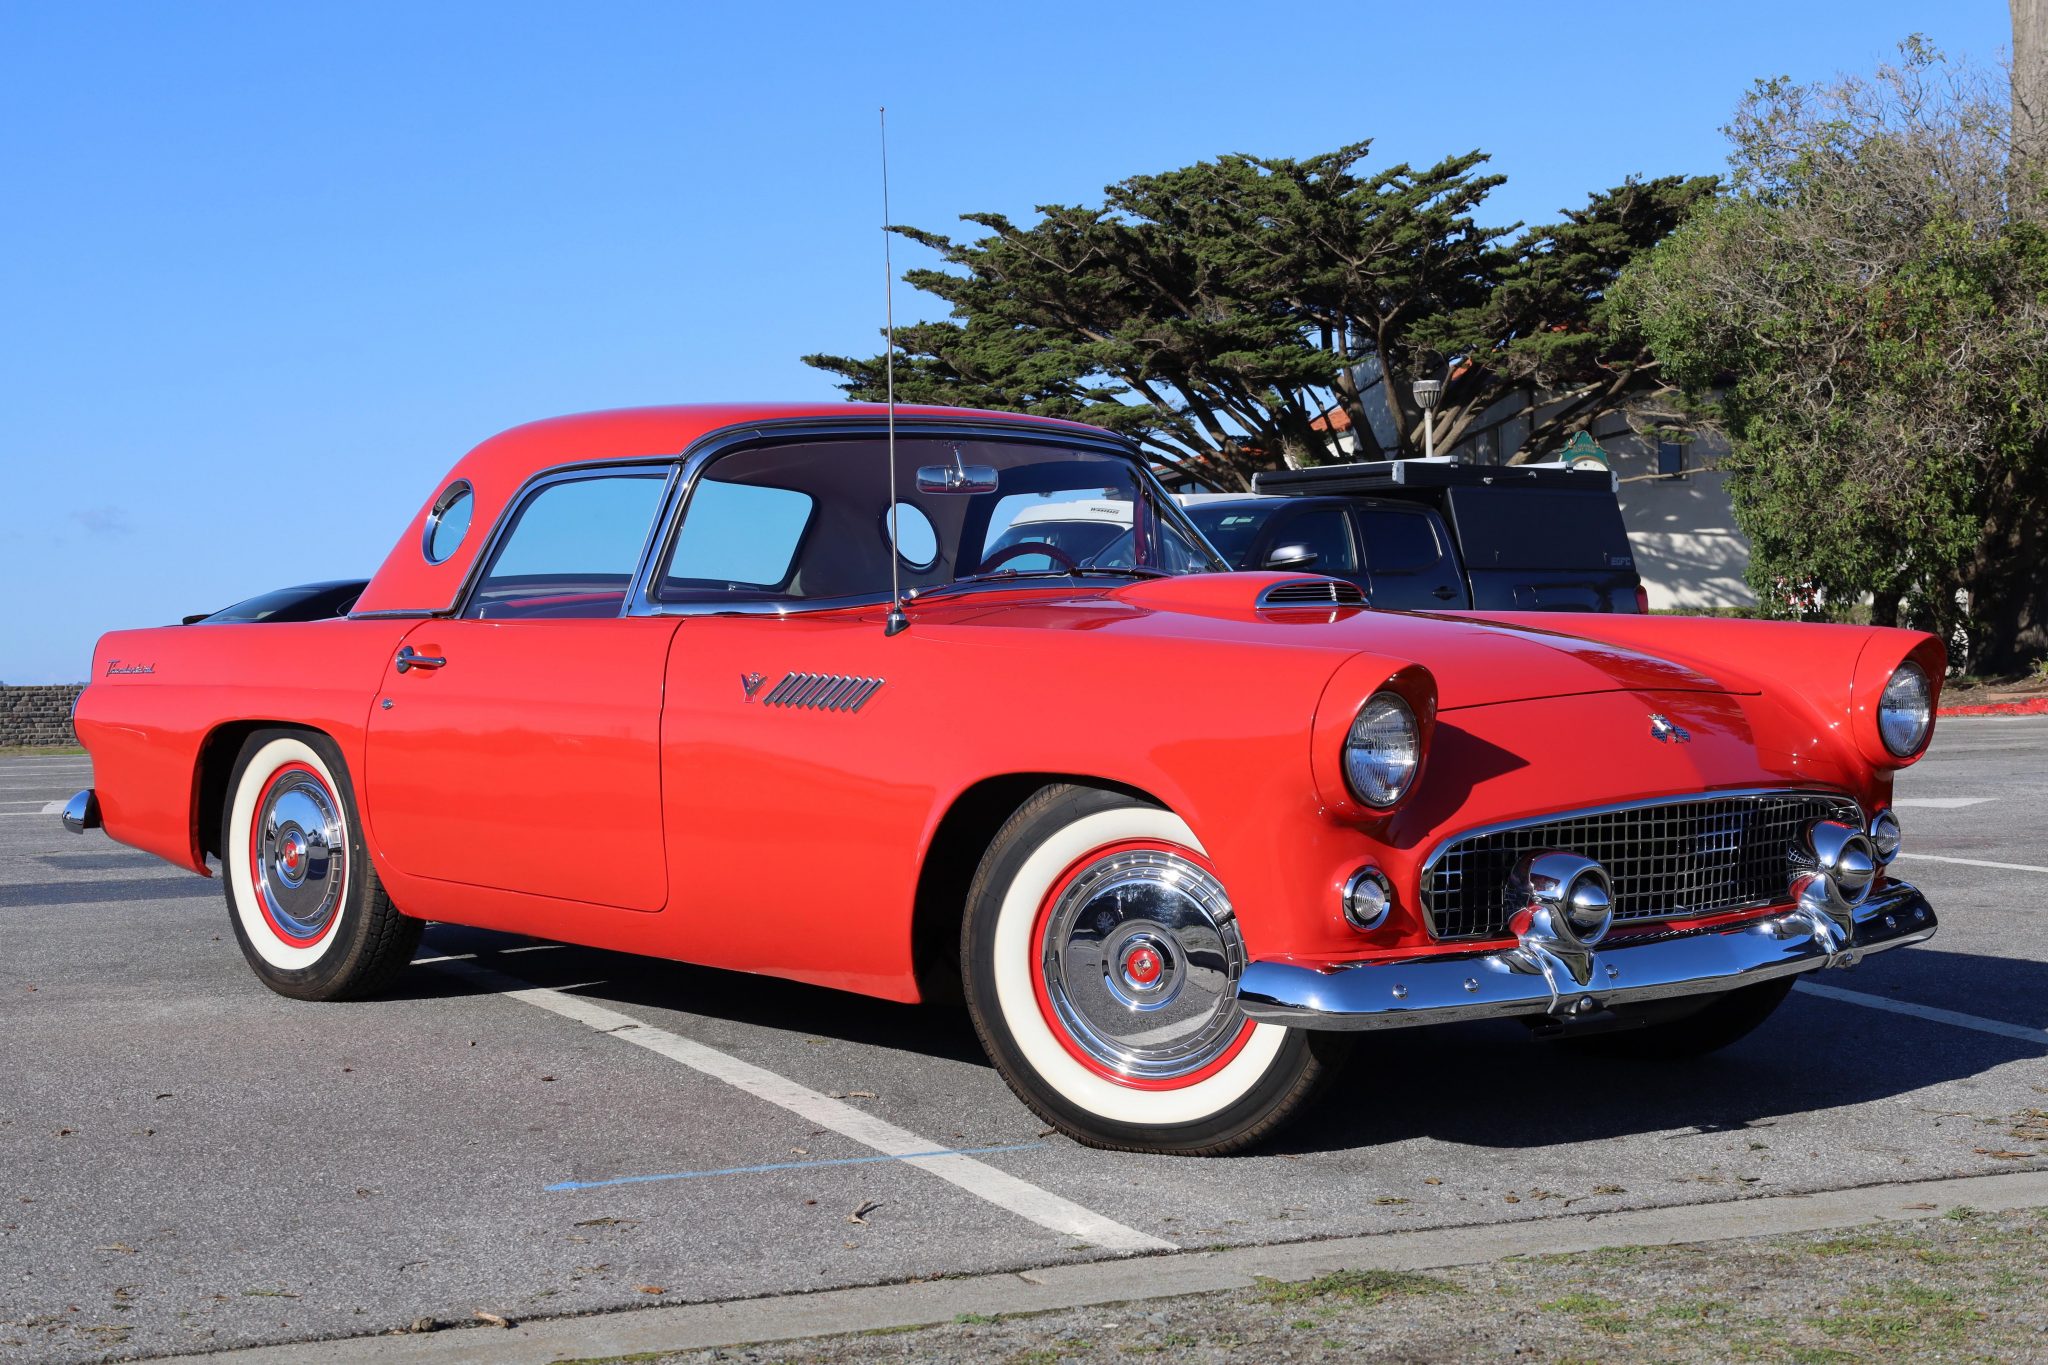 1955 Ford Thunderbird Front Corner View- Torch Red